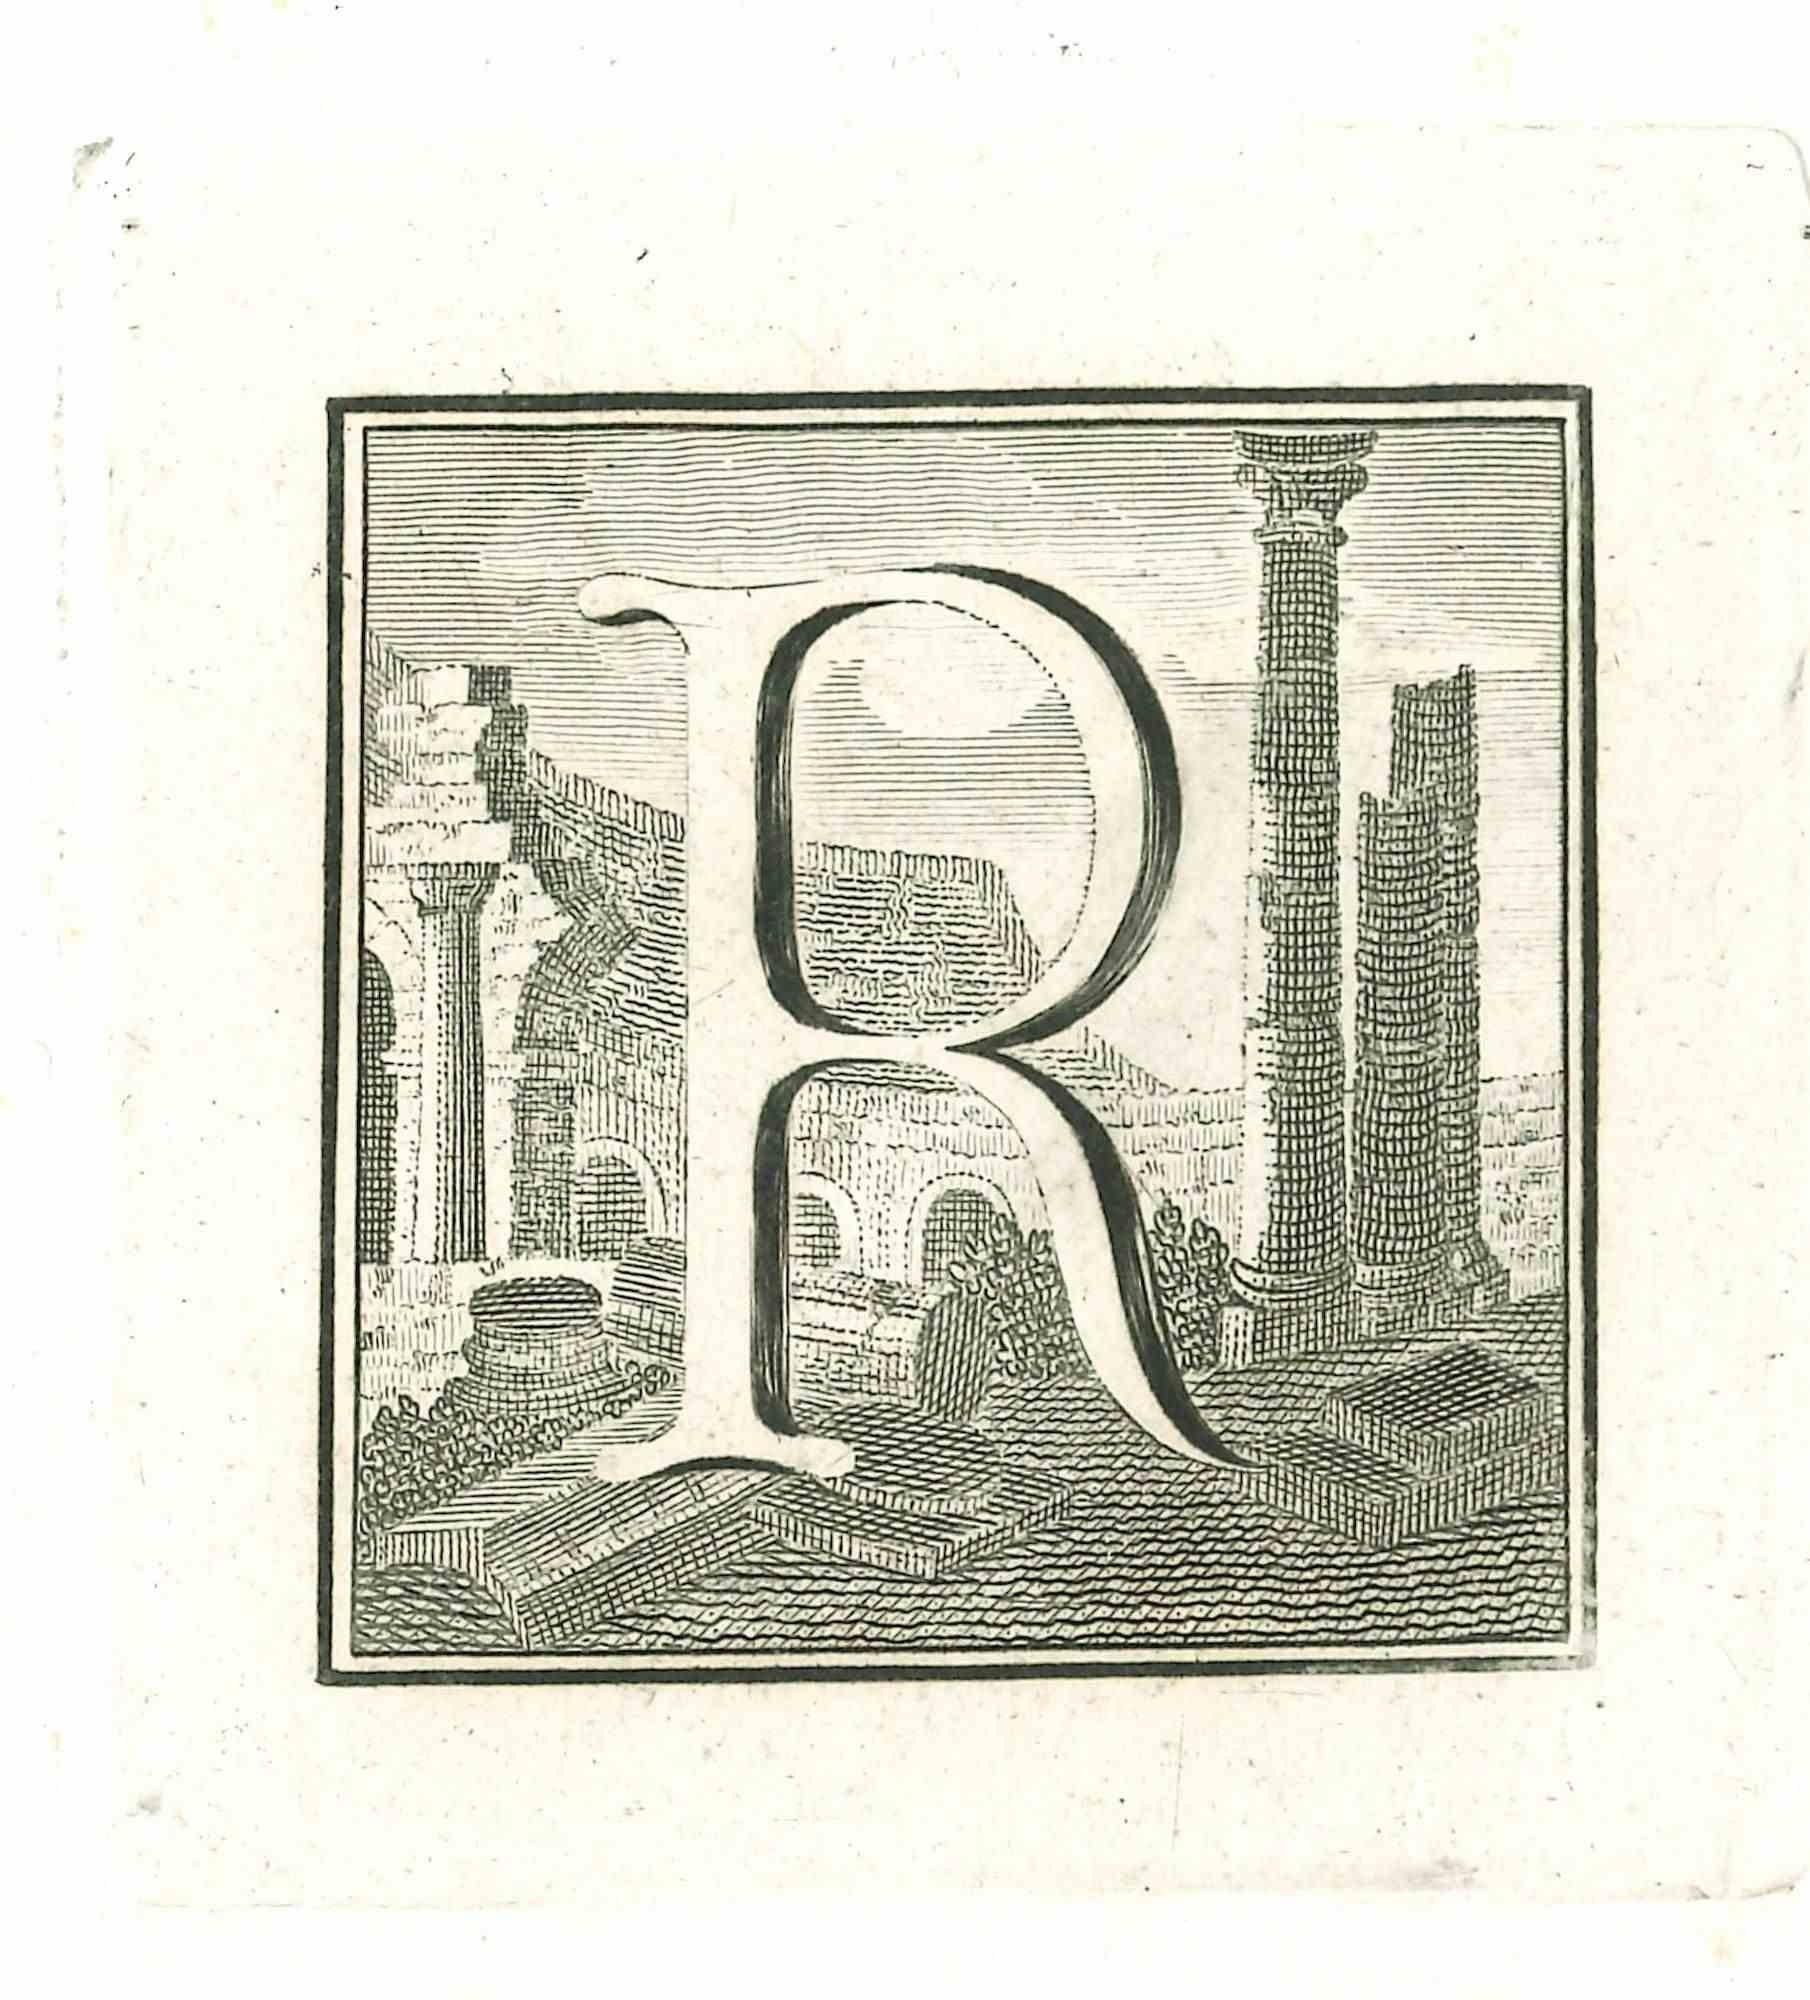 Unknown Figurative Print - Capital Letter for the Antiquities of Herculaneum Exposed-Etching - 18th Century